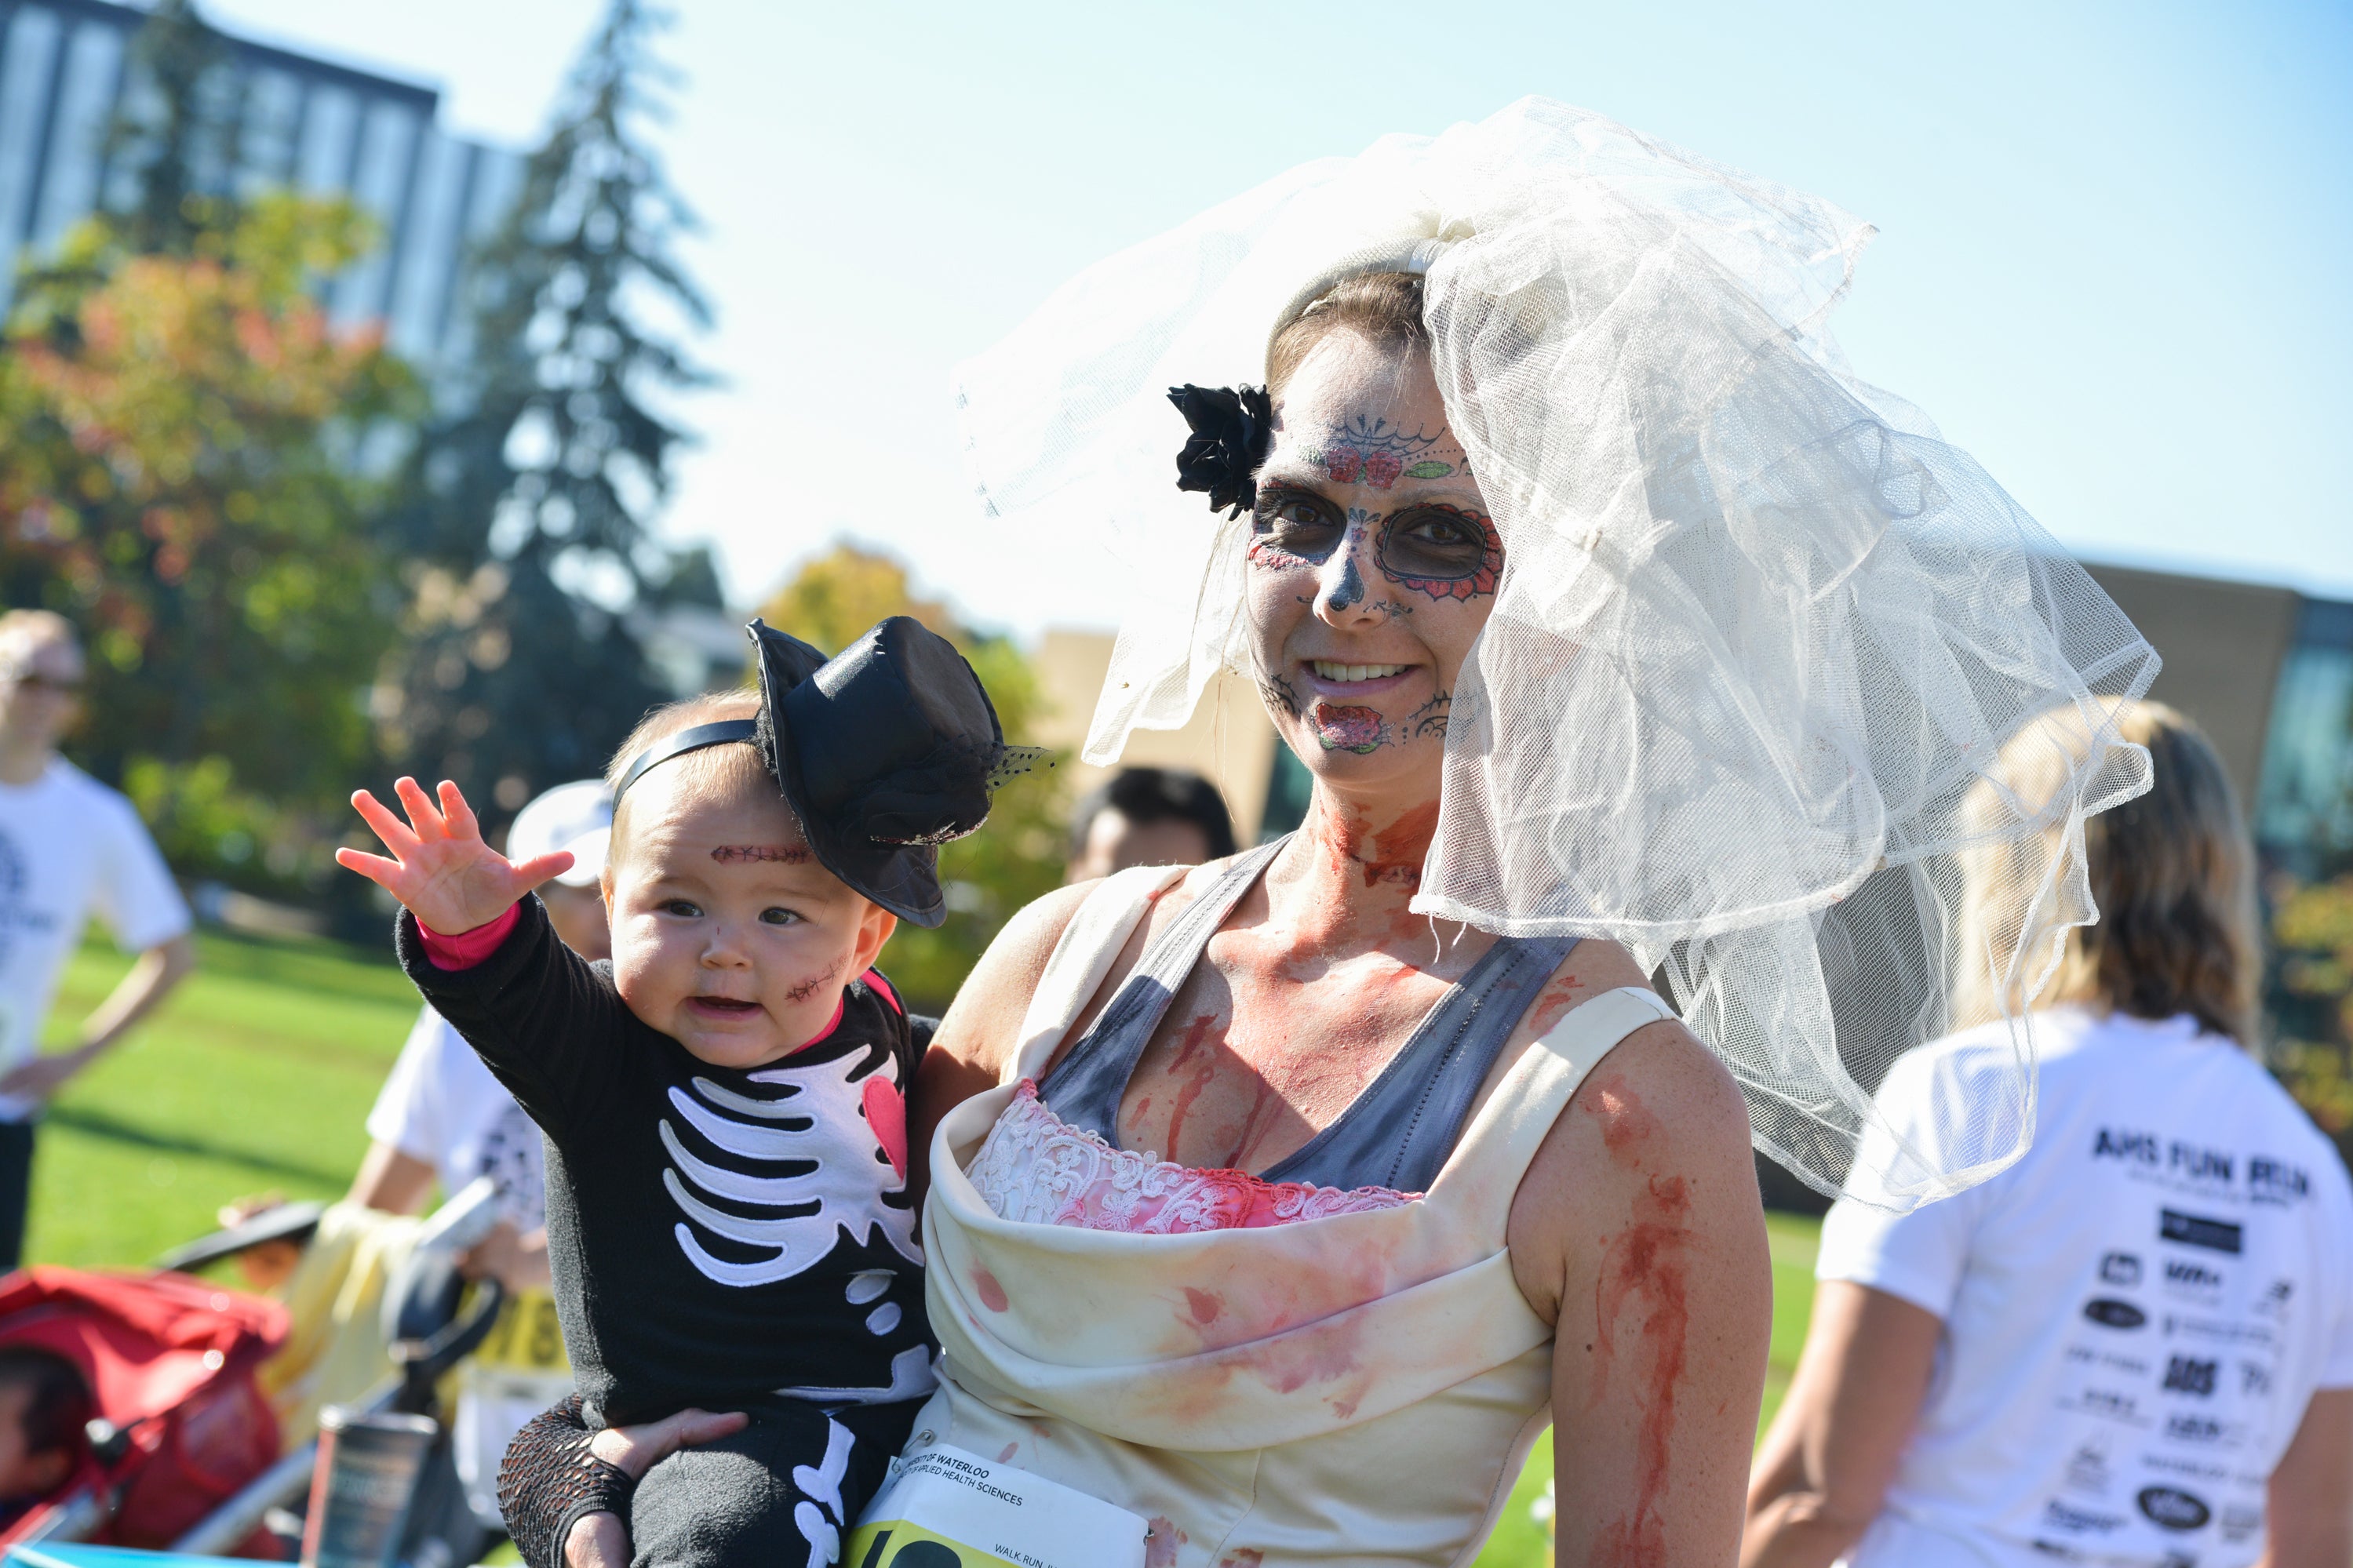 Fun Run participants and baby in costume